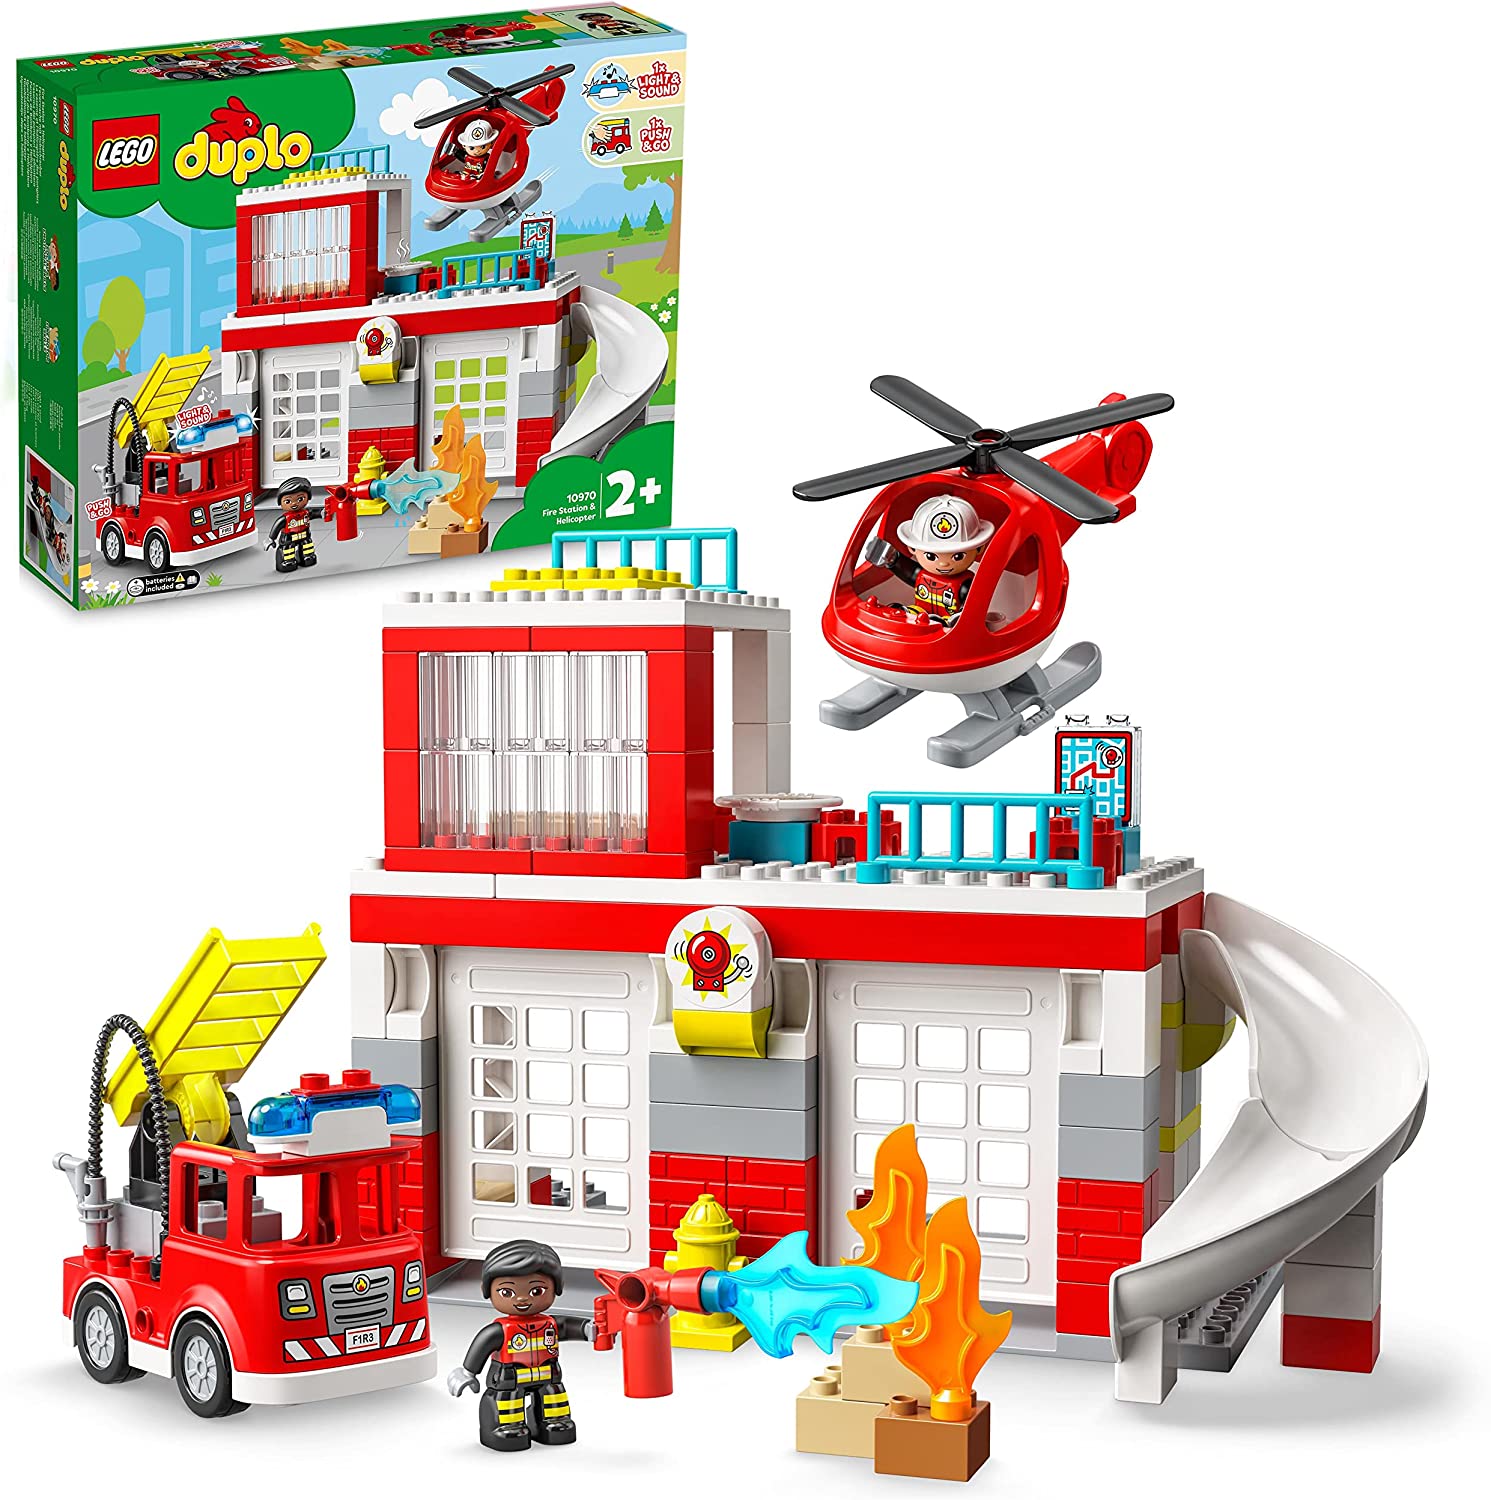 LEGO 10970 DUPLO Fire Station with Helicopter, Fire Engine Toy for Toddlers from 2 Years with Fire Engine, Building Blocks for Girls and Boys